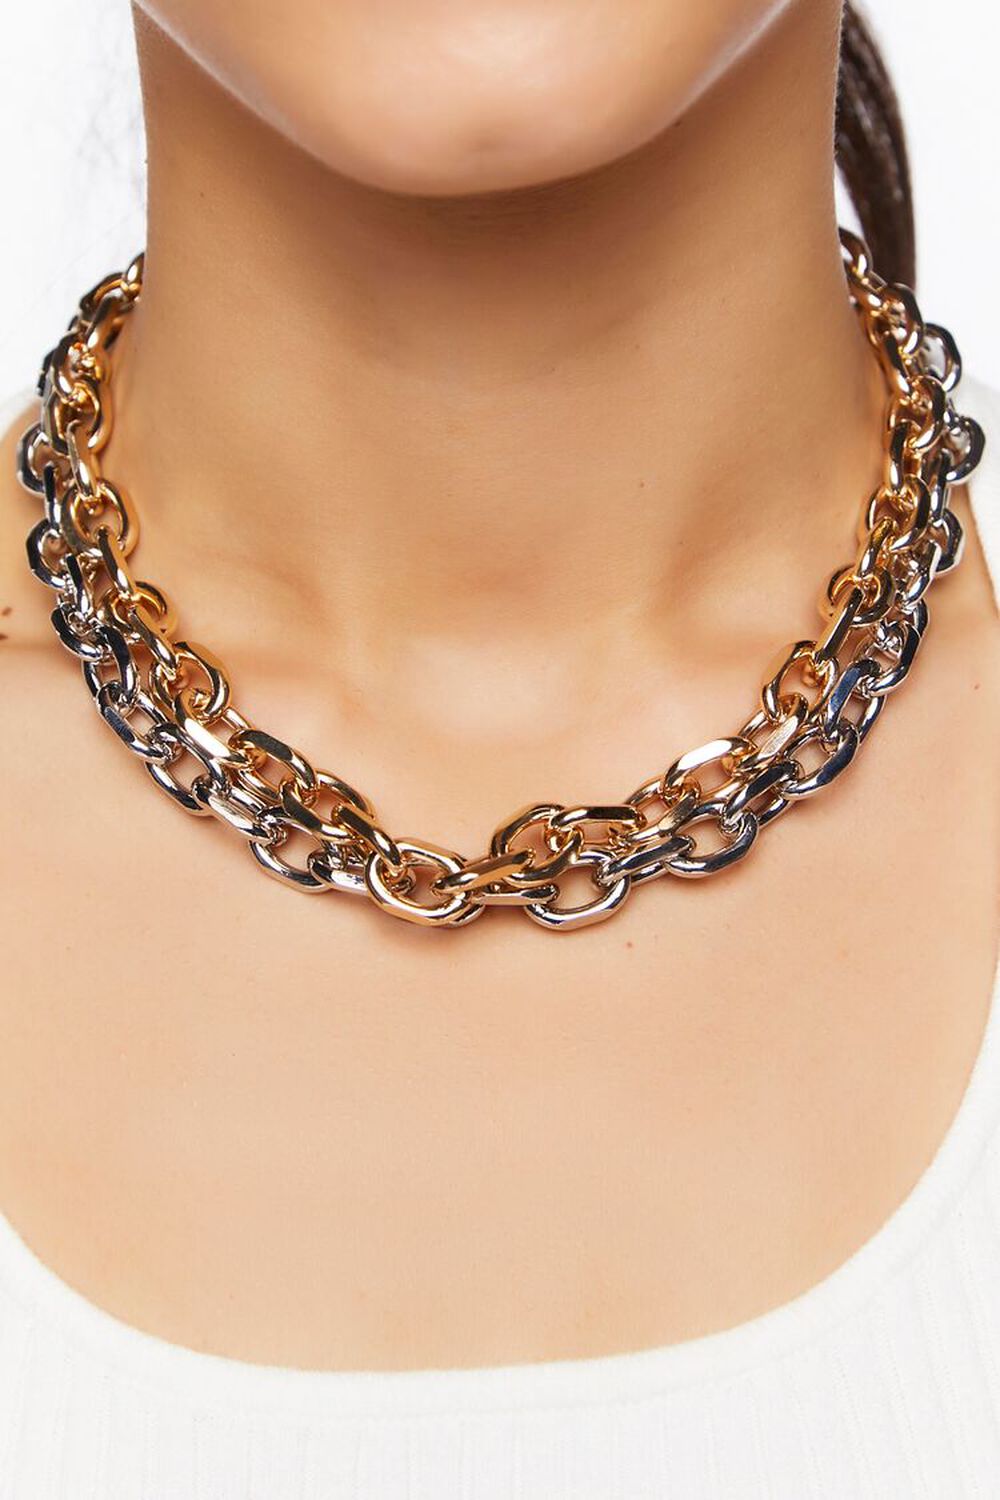 GOLD/SILVER Chunky Necklace Set, image 1